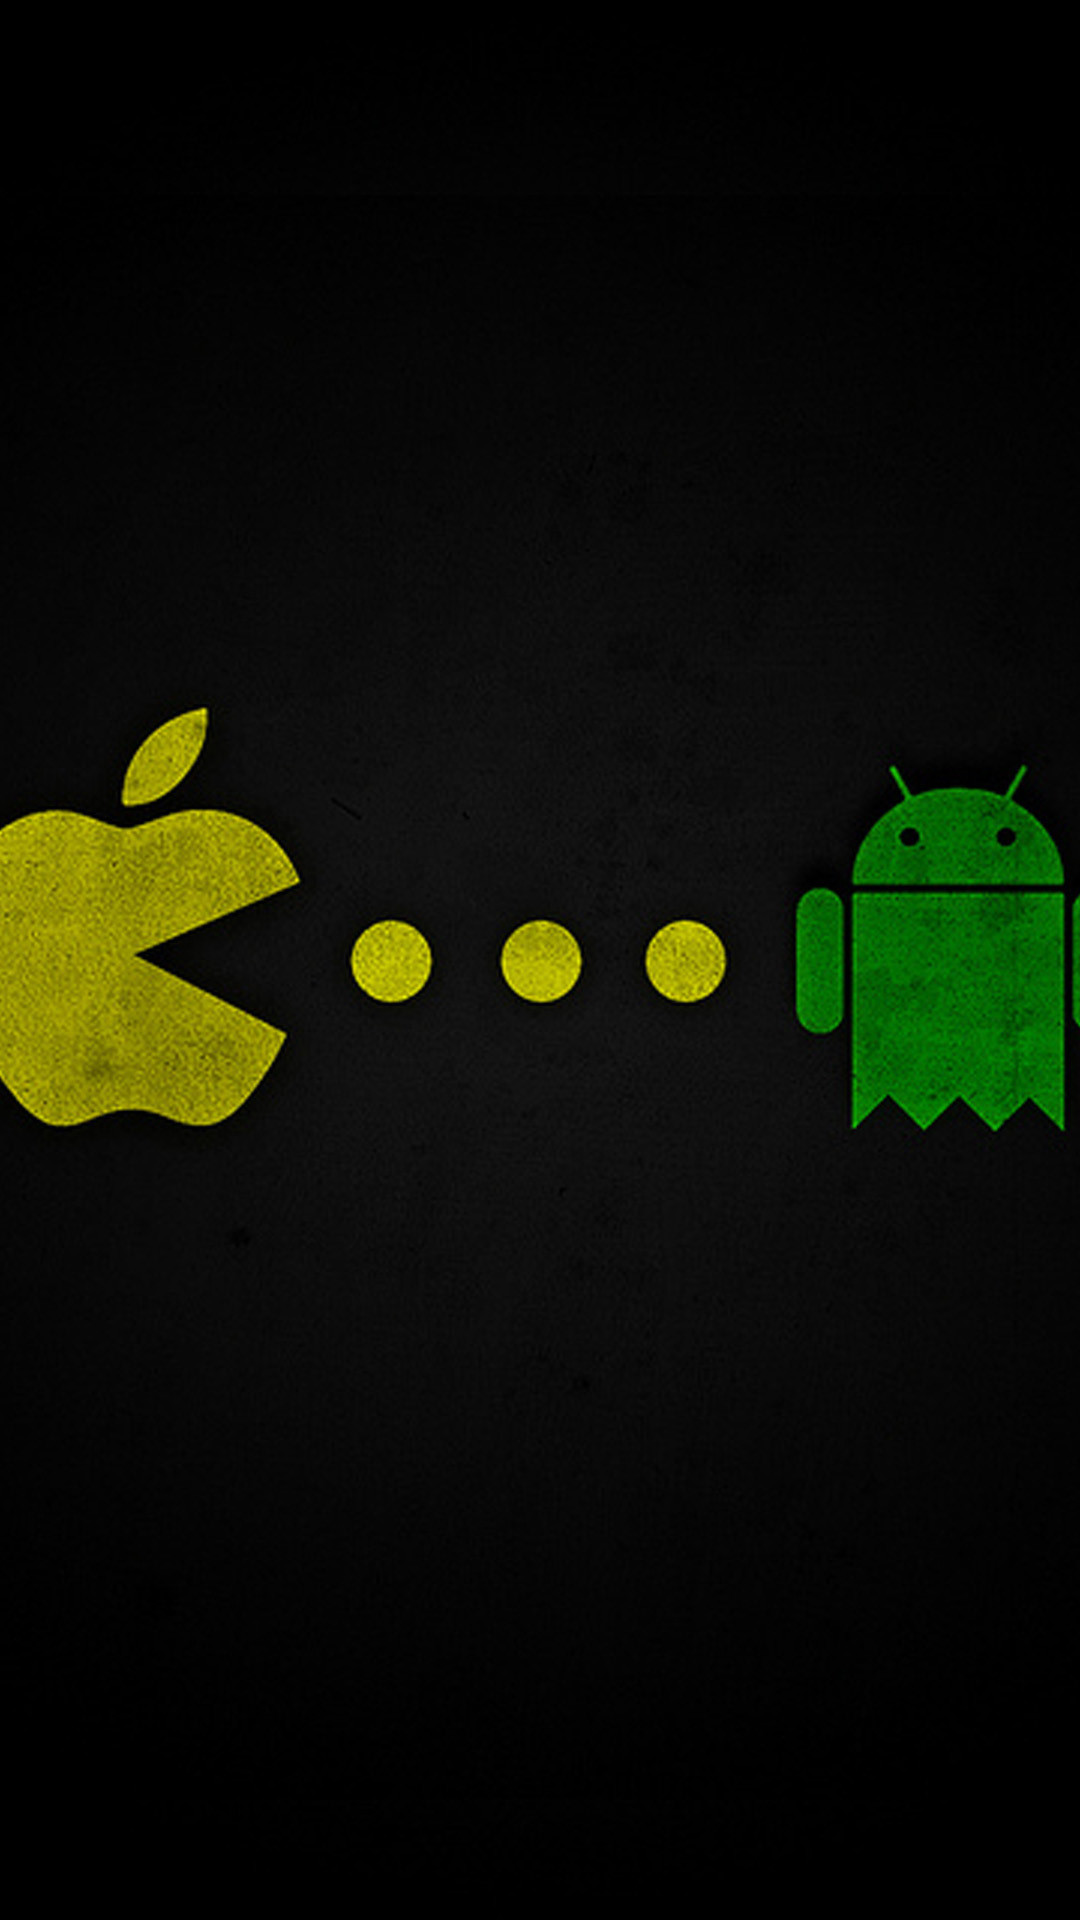 1080x1920 Android Vs Apple Wallpaper Hd / Image Source